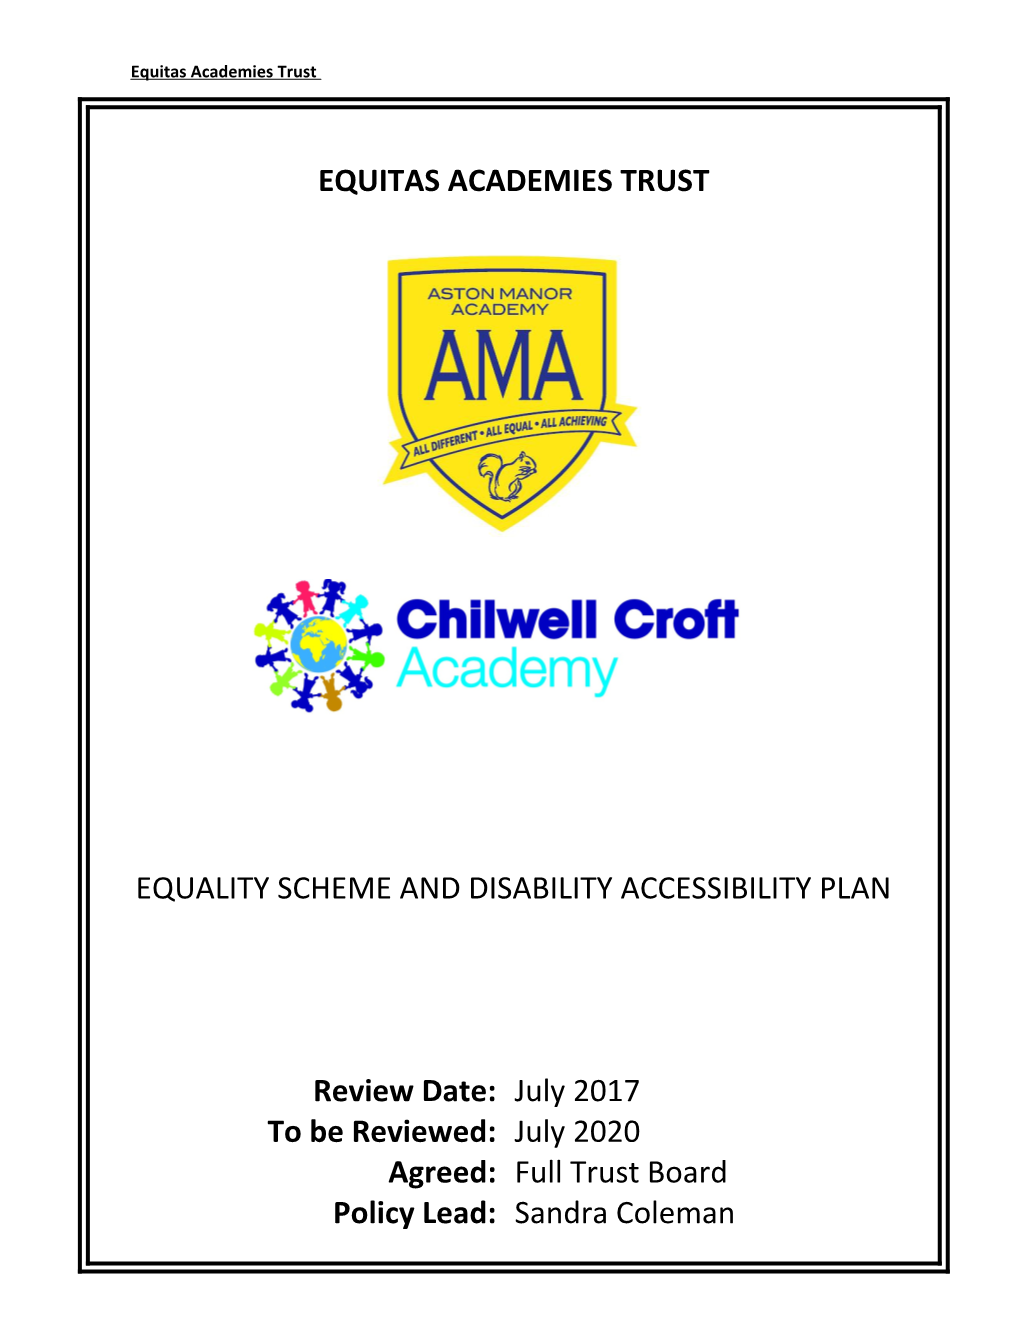 Equality Scheme and Disability Accessibility Plan